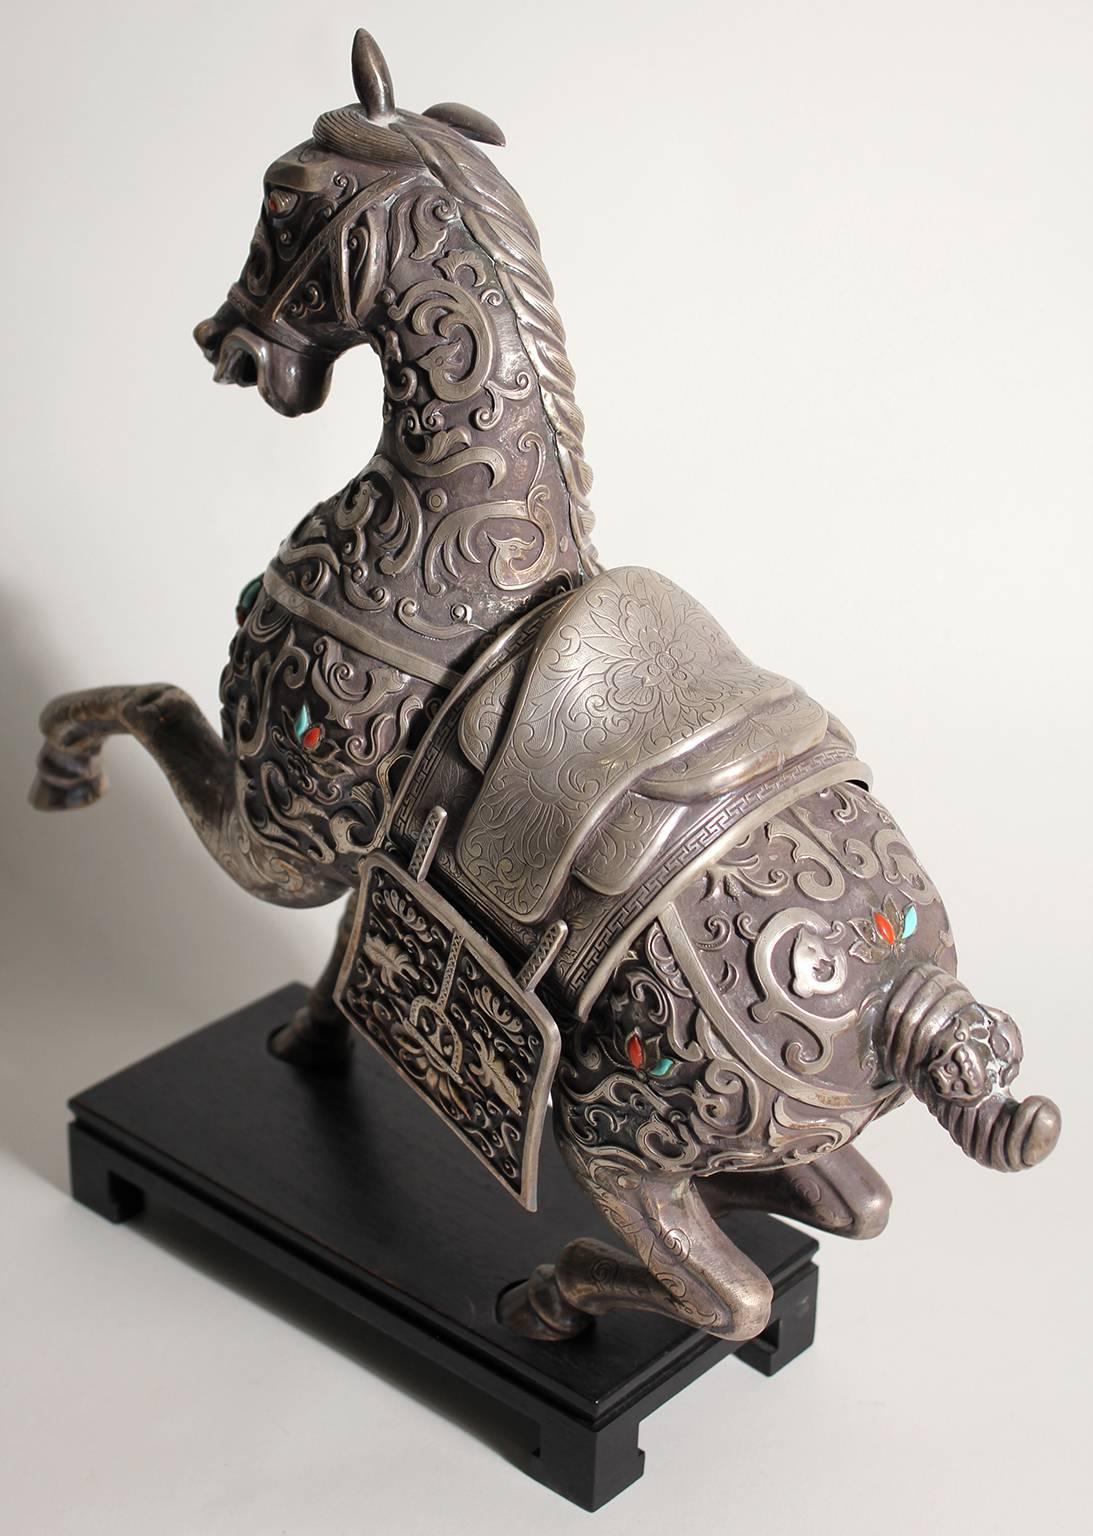 Monumental 19th Century Chinese Sterling Silver Horse Sculpture Censer 45 Ounces In Good Condition For Sale In San Diego, CA